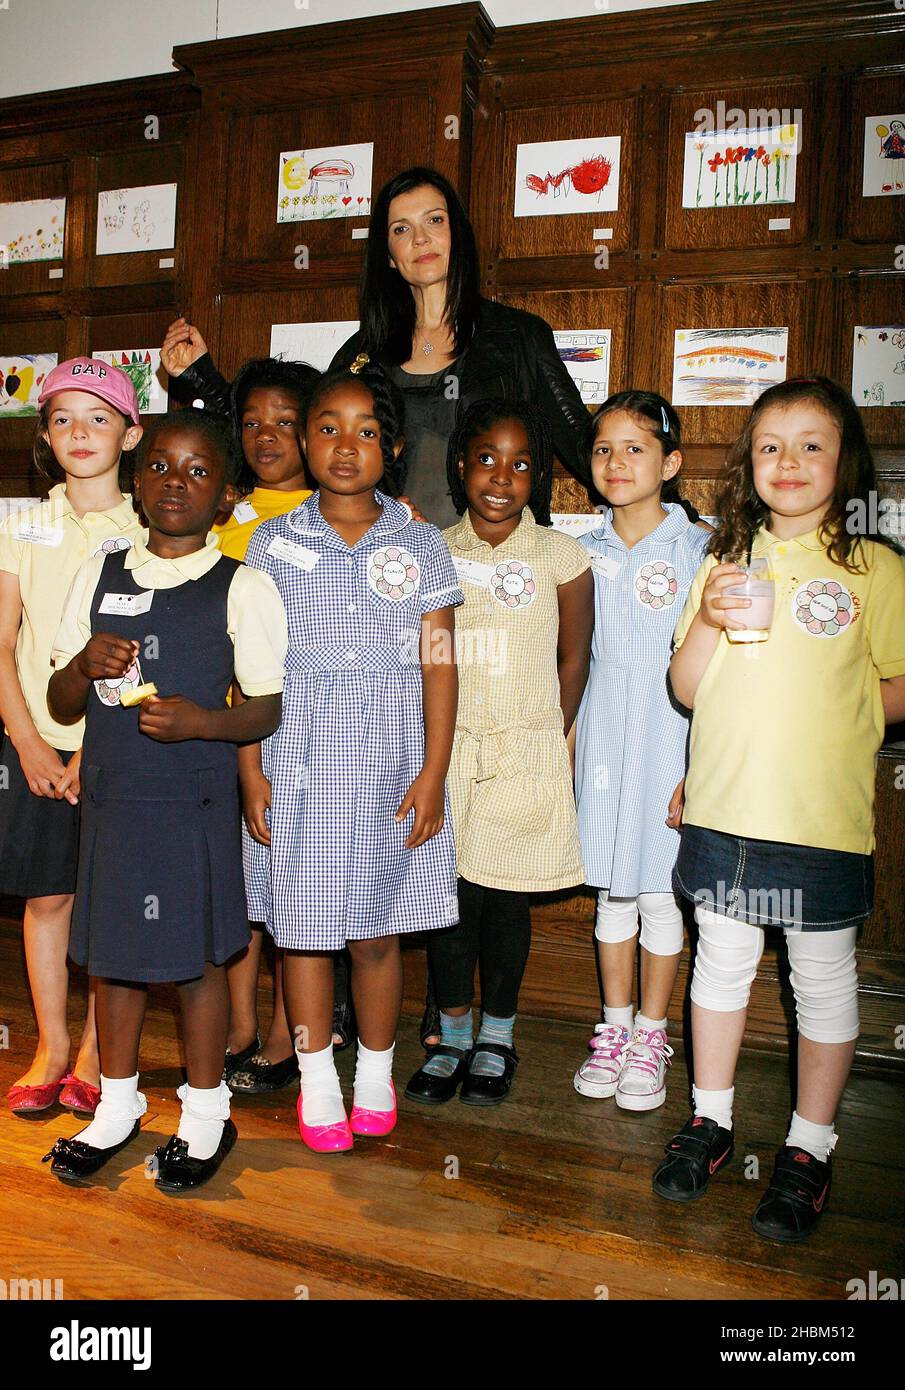 Ali Hewson, Bono's wife, attends the launch of her fashion brand's new Kenya Kids Tees collection at Liberty's of London. She was joined by children from Homeleigh School in East London. Stock Photo